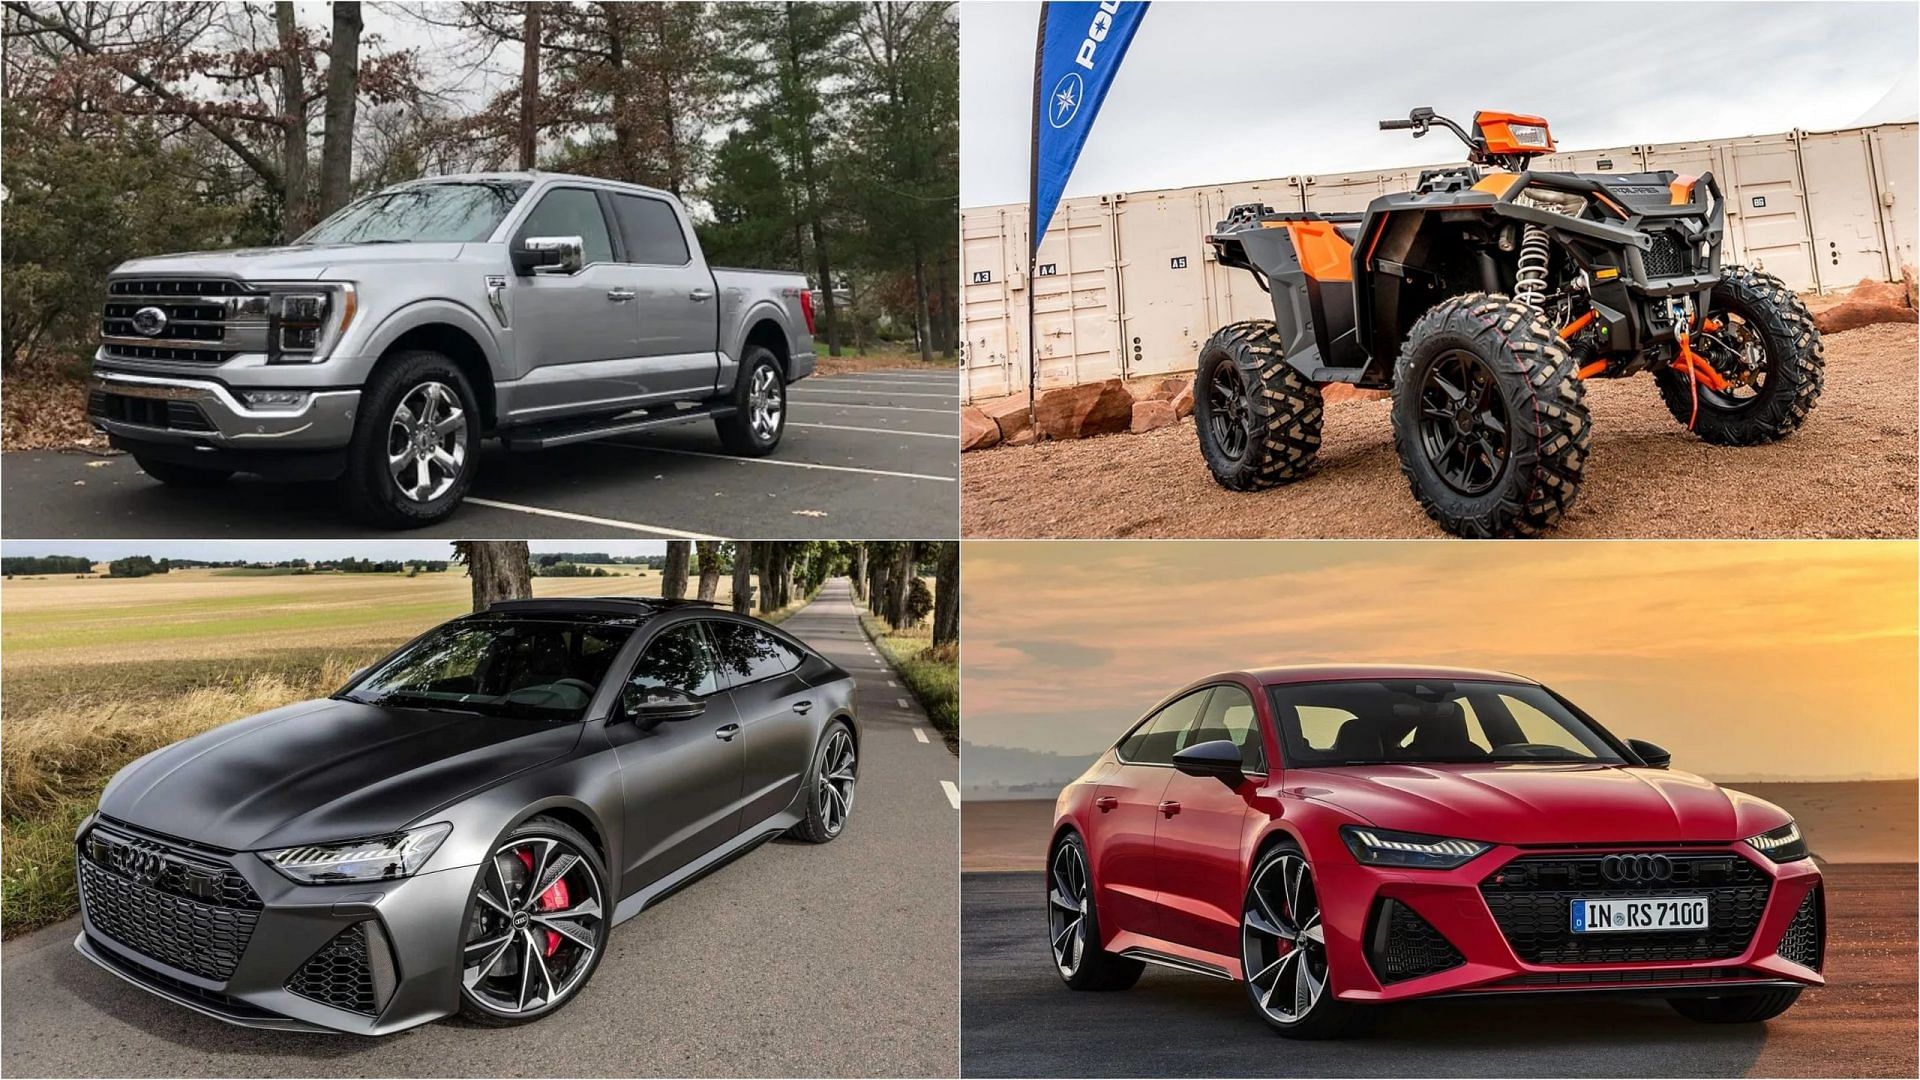 JJ Watt’s car collection includes audi rs7 sportback, ford f150 pickup truck and ATV